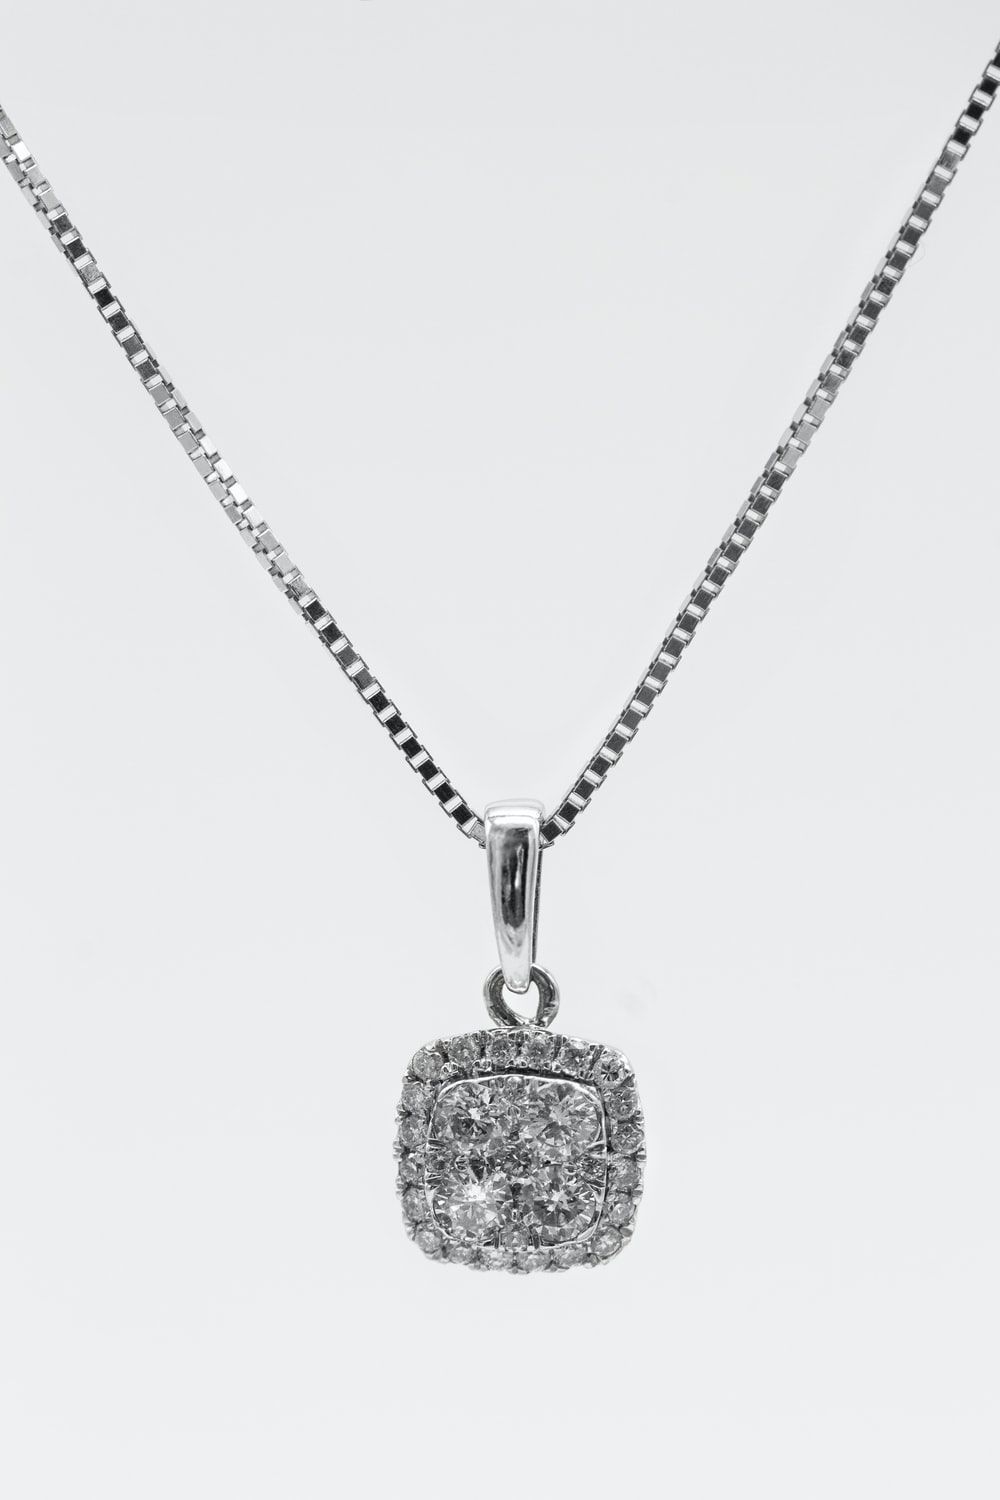 Diamond Necklace Picture. Download Free Image